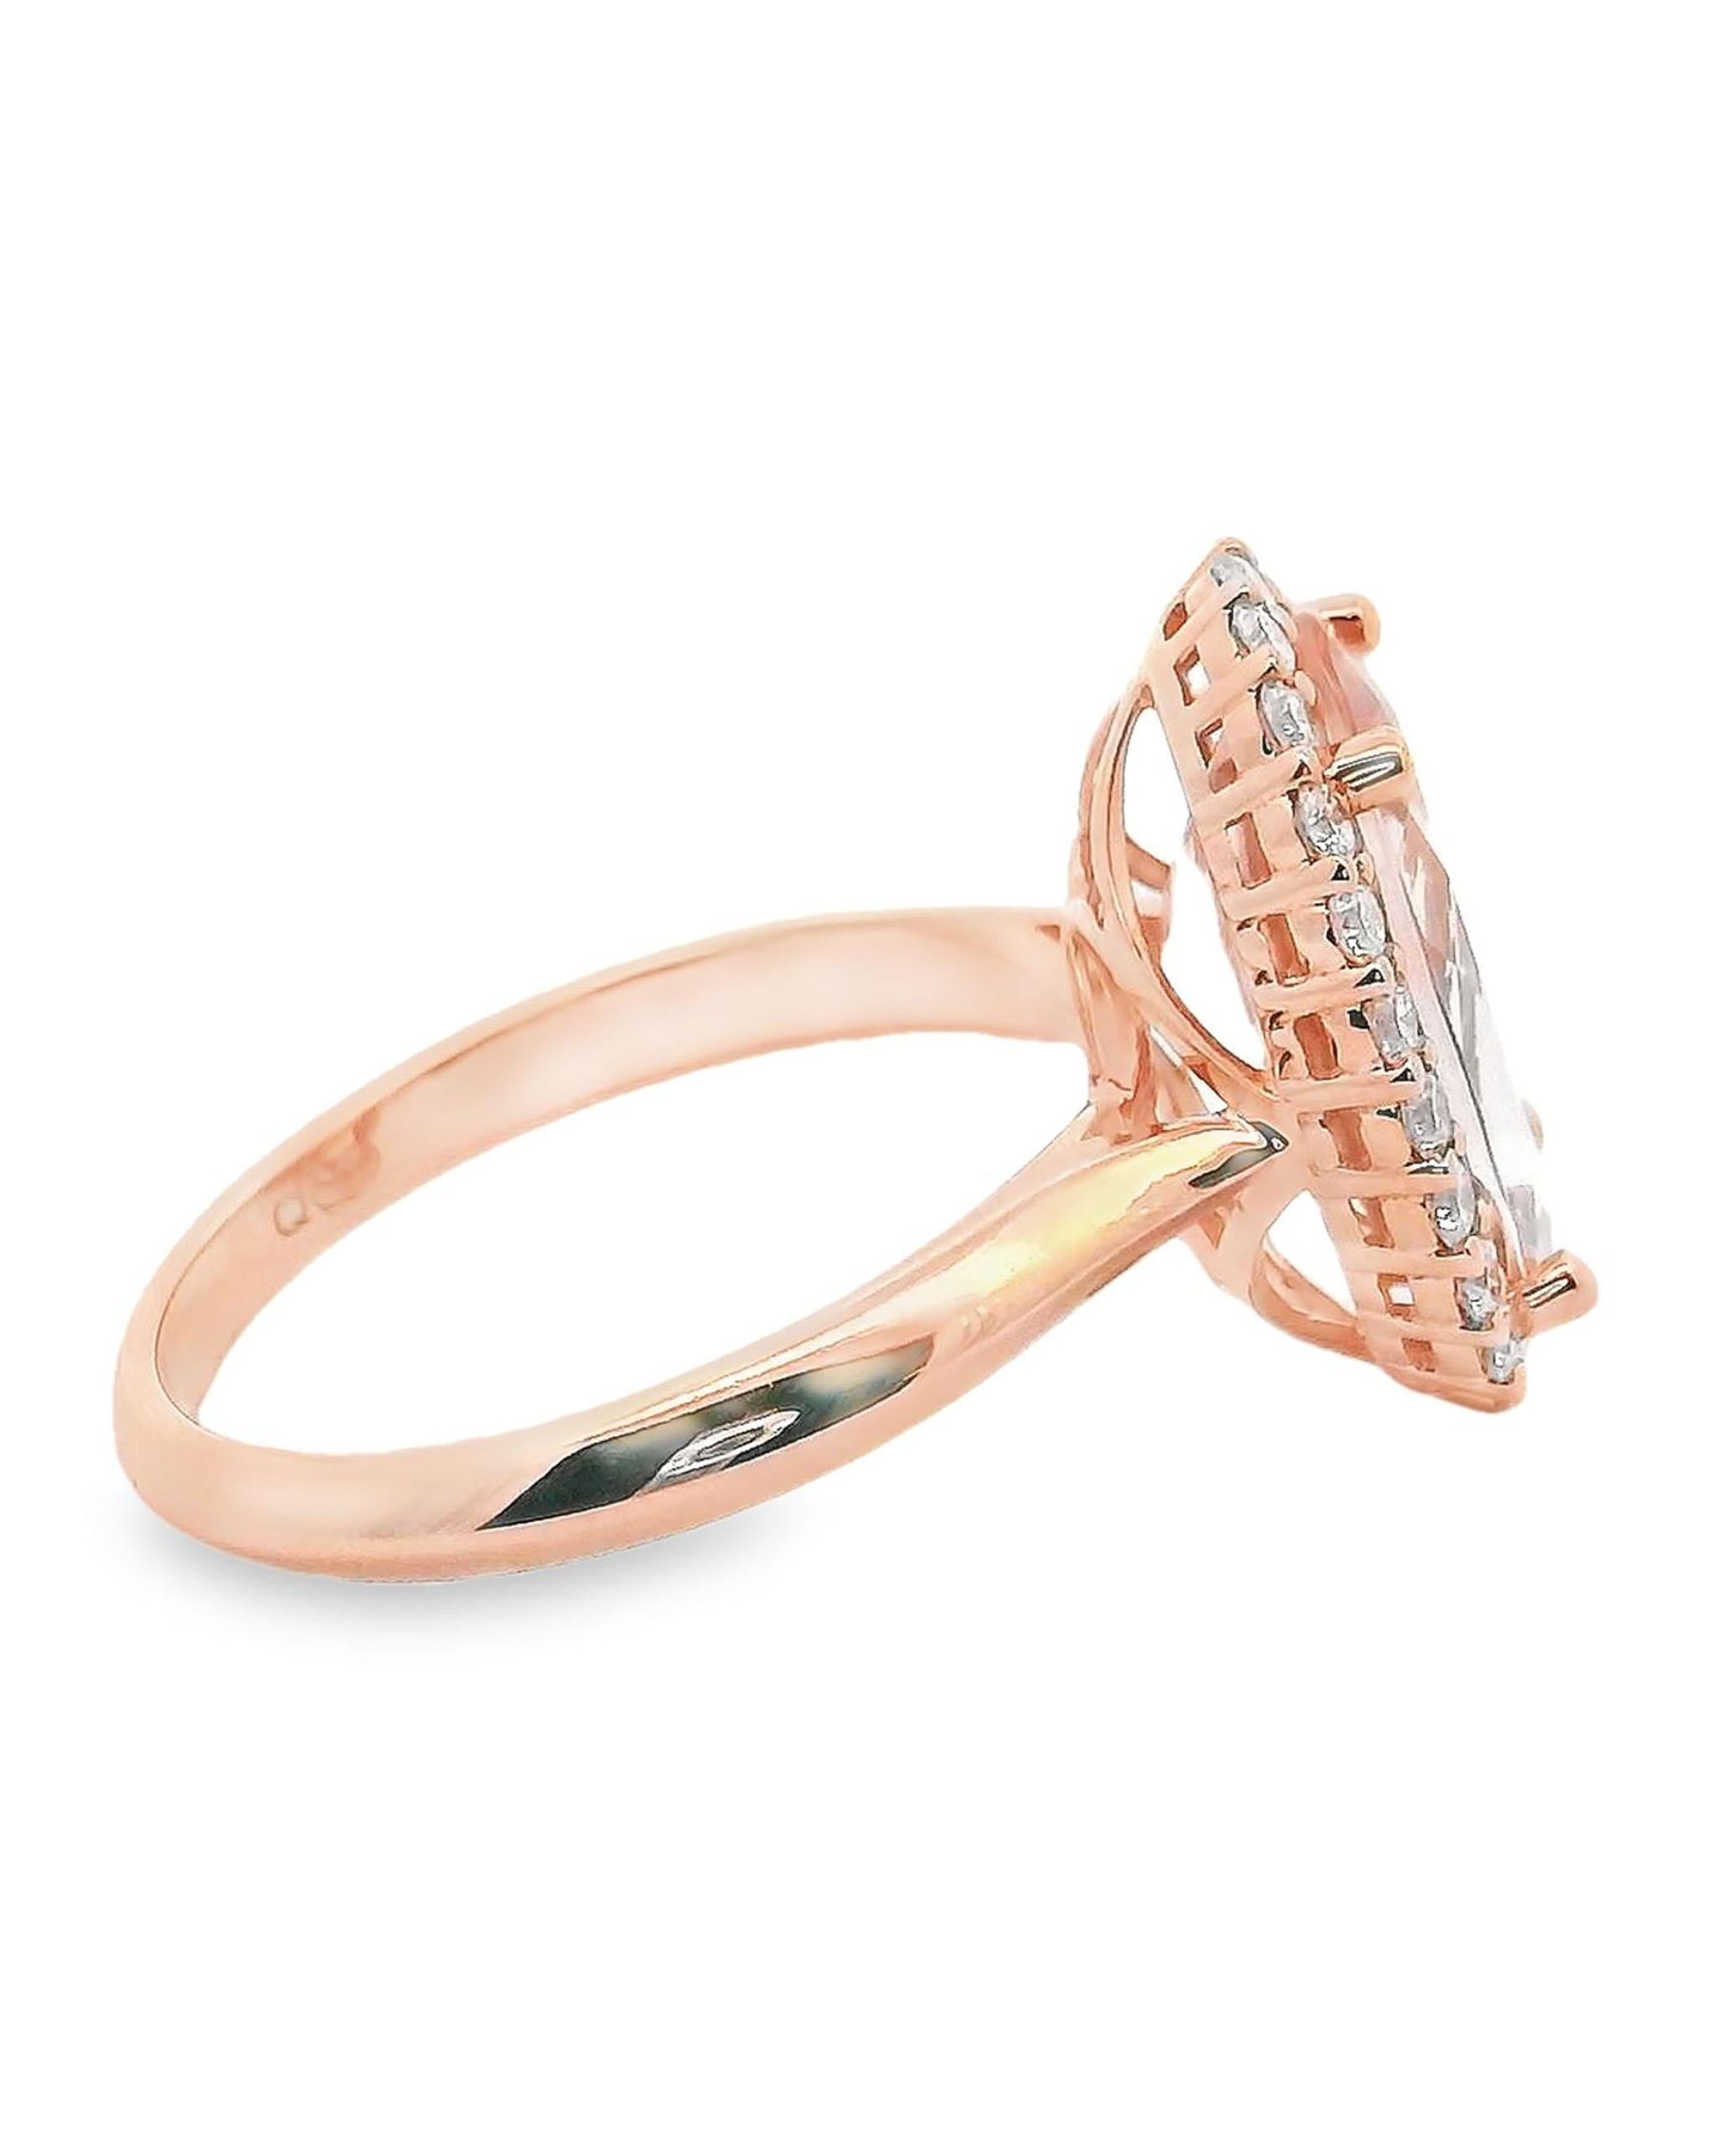 14K rose gold ring with round faceted diamonds weighing 0.44 carat total and one center oval shape morganite weighing 4.74 carats. 

- Finger size 6.5 (can be sized)
- Diamonds are H/I color, SI clarity.